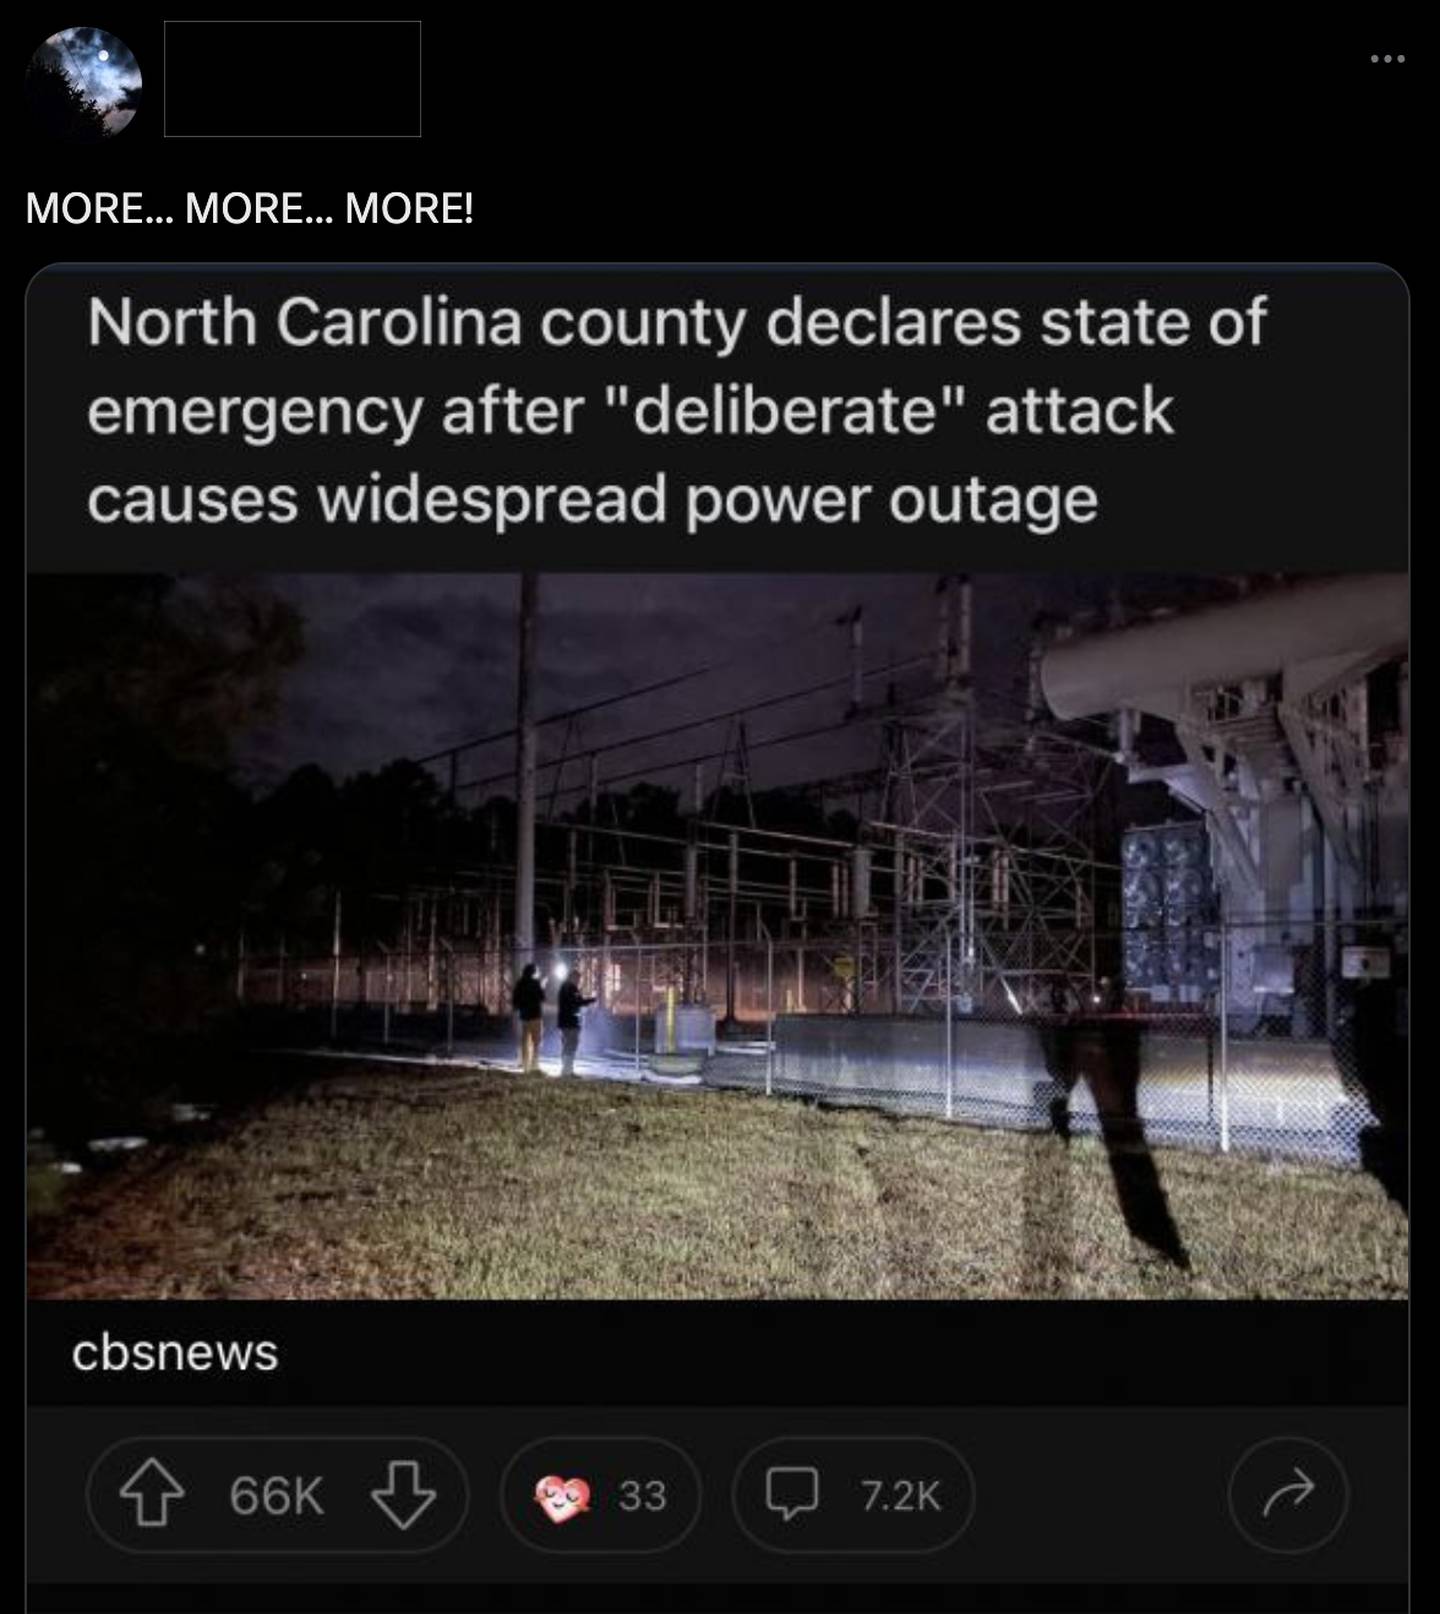 A screenshot from Sarah Beth Clendaniel's Twitter account encouraging more energy grid attacks.